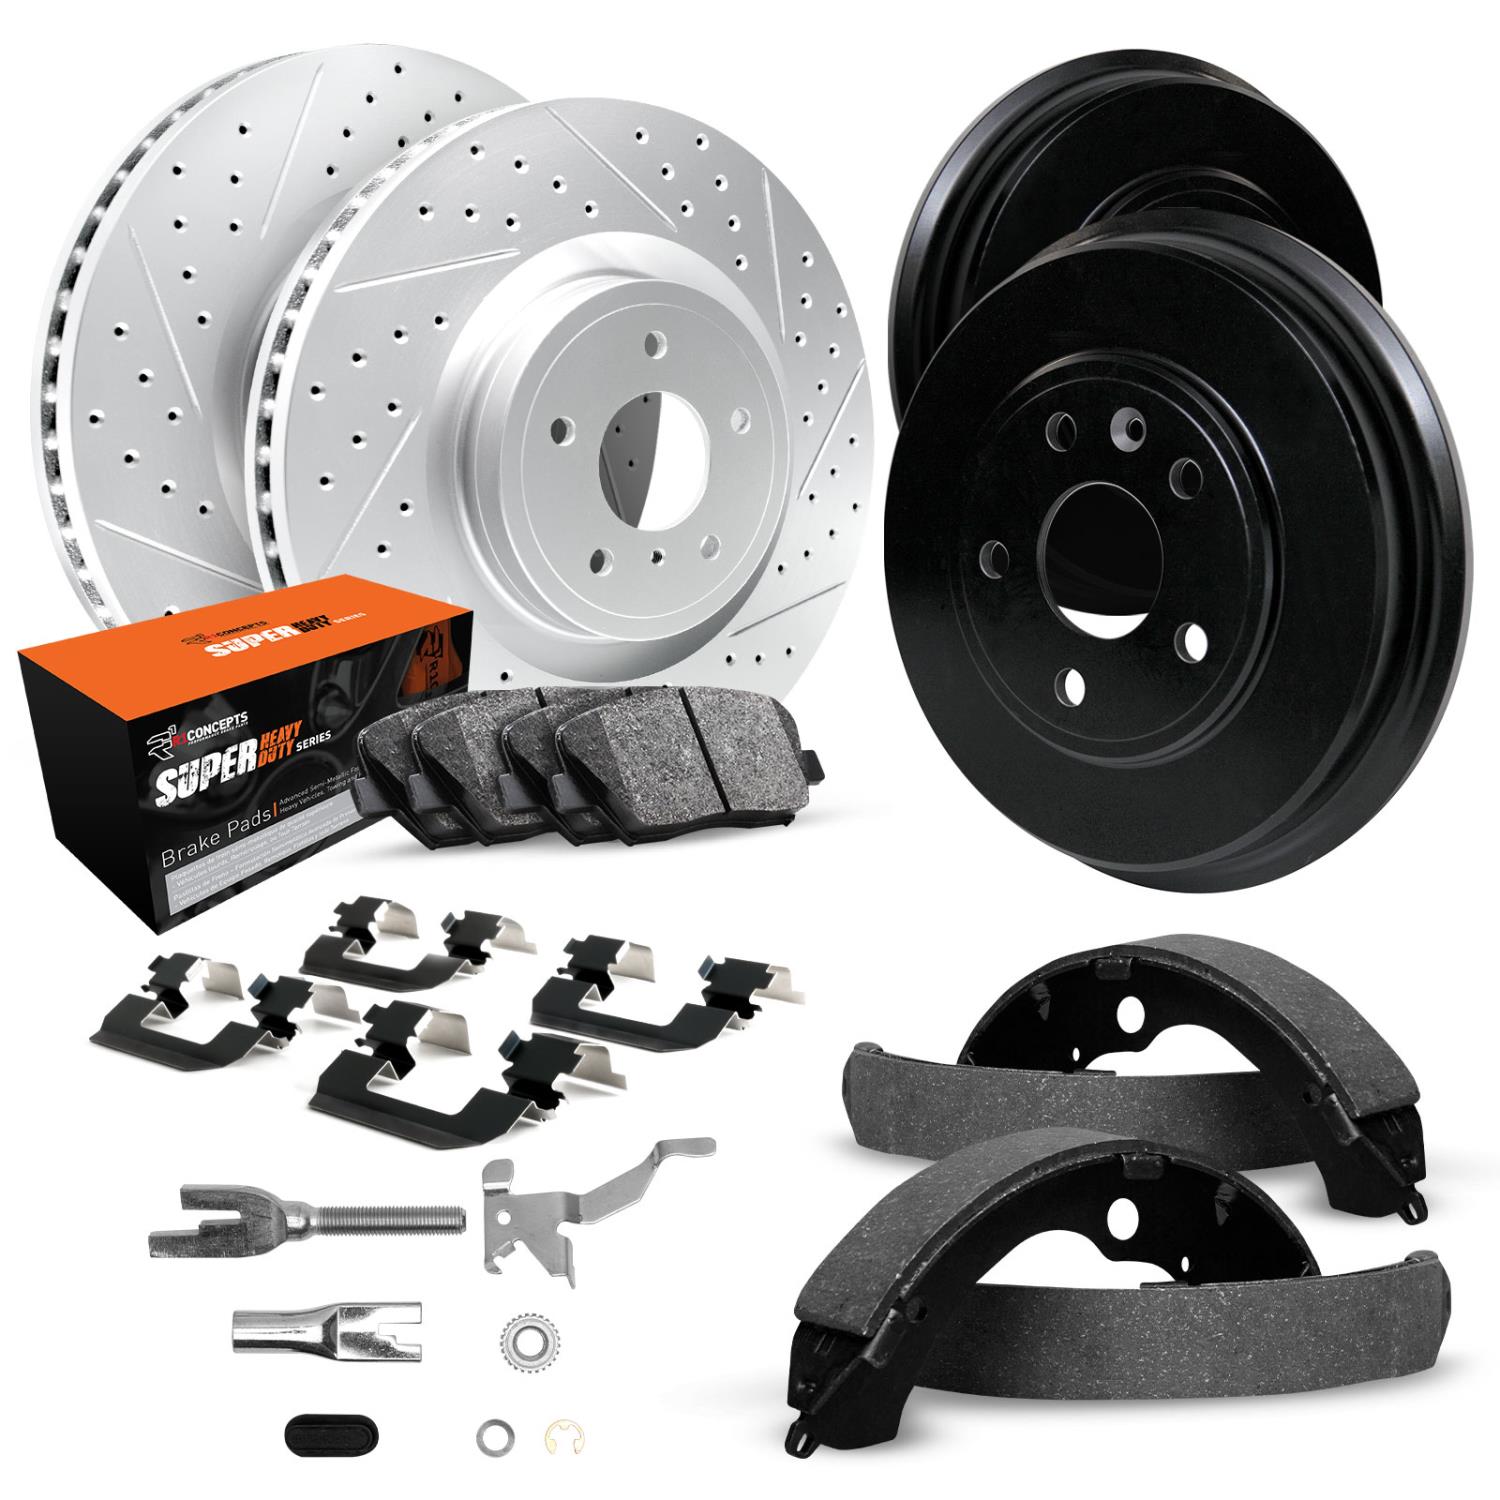 GEO-Carbon Drilled/Slotted Rotors/Drums w/Super-Duty Pads/Shoes/Hardware/Adjusters, 1994-1997 Mopar, Position: Front/Rear